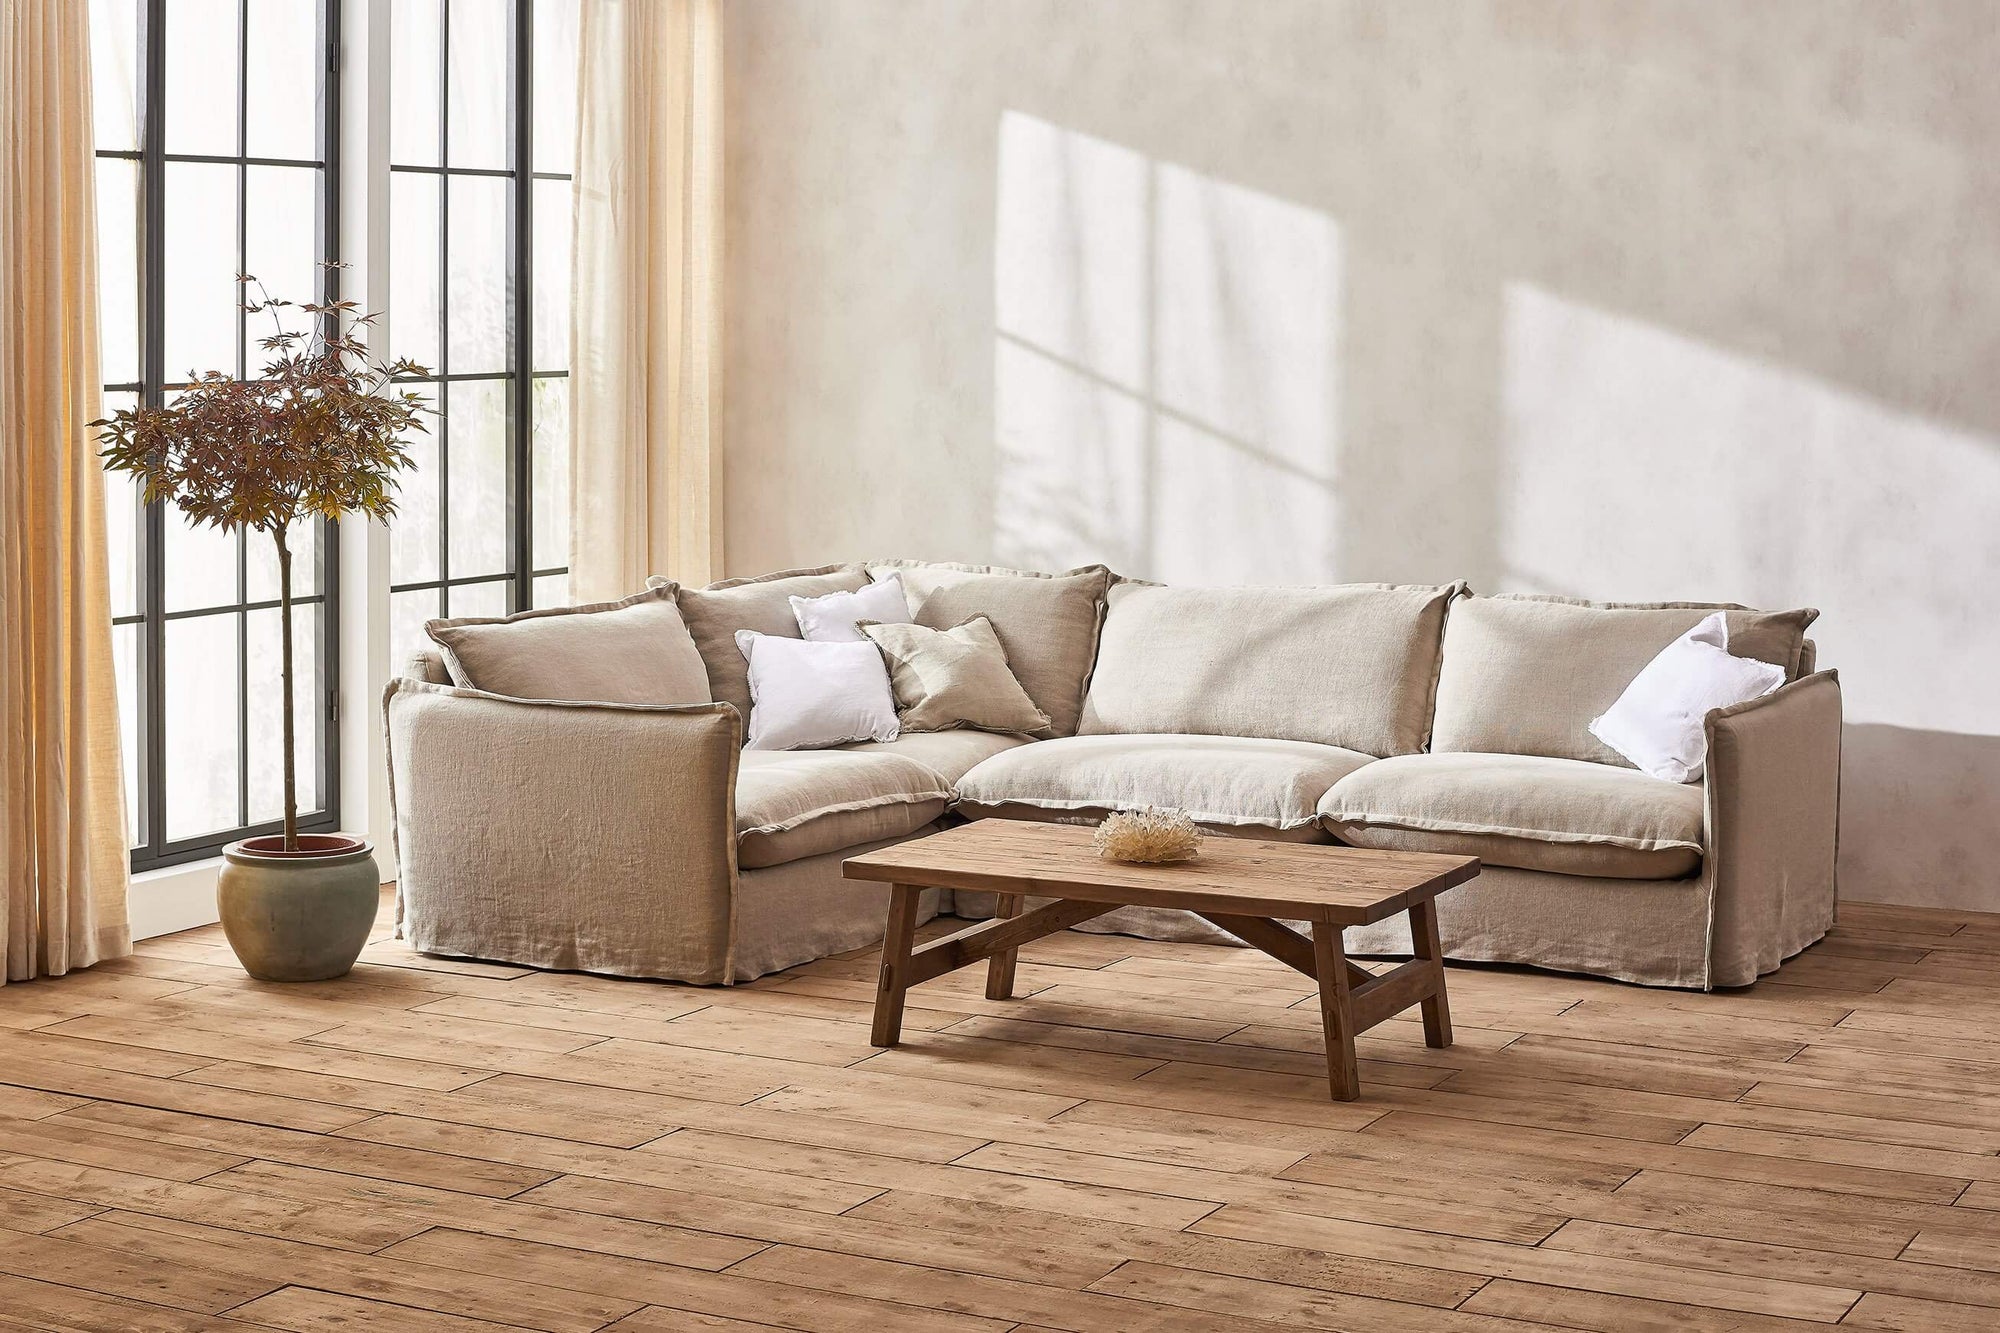 Neva L-Shape Sectional Sofa in Jasmine Rice, a light warm greige Medium Weight Linen, placed in a sunlit room with a coffee table